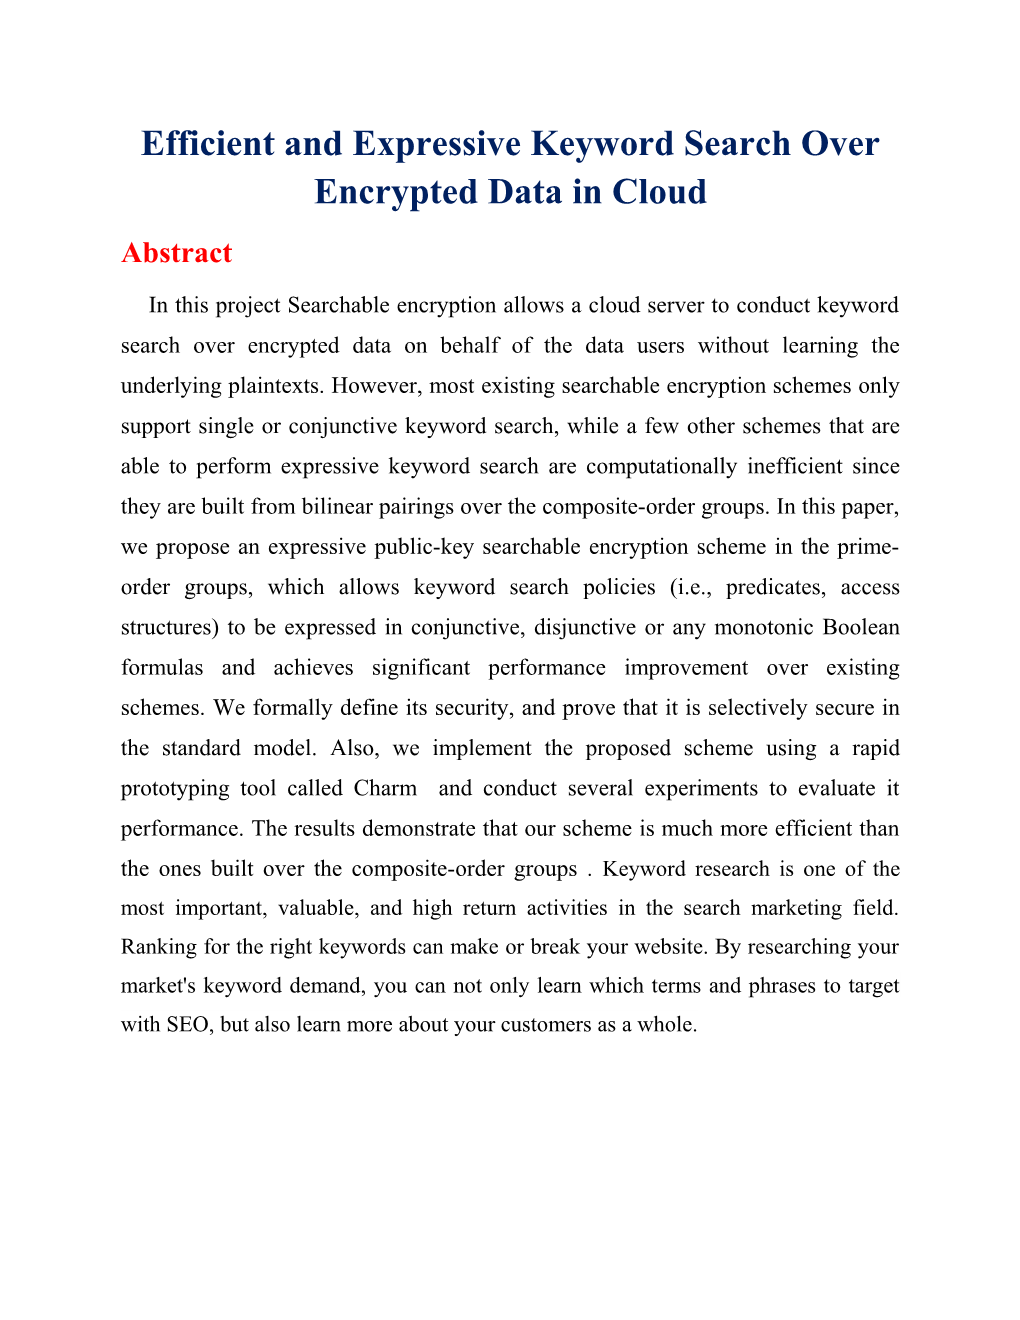 Efficient and Expressive Keyword Search Over Encrypted Data in Cloud